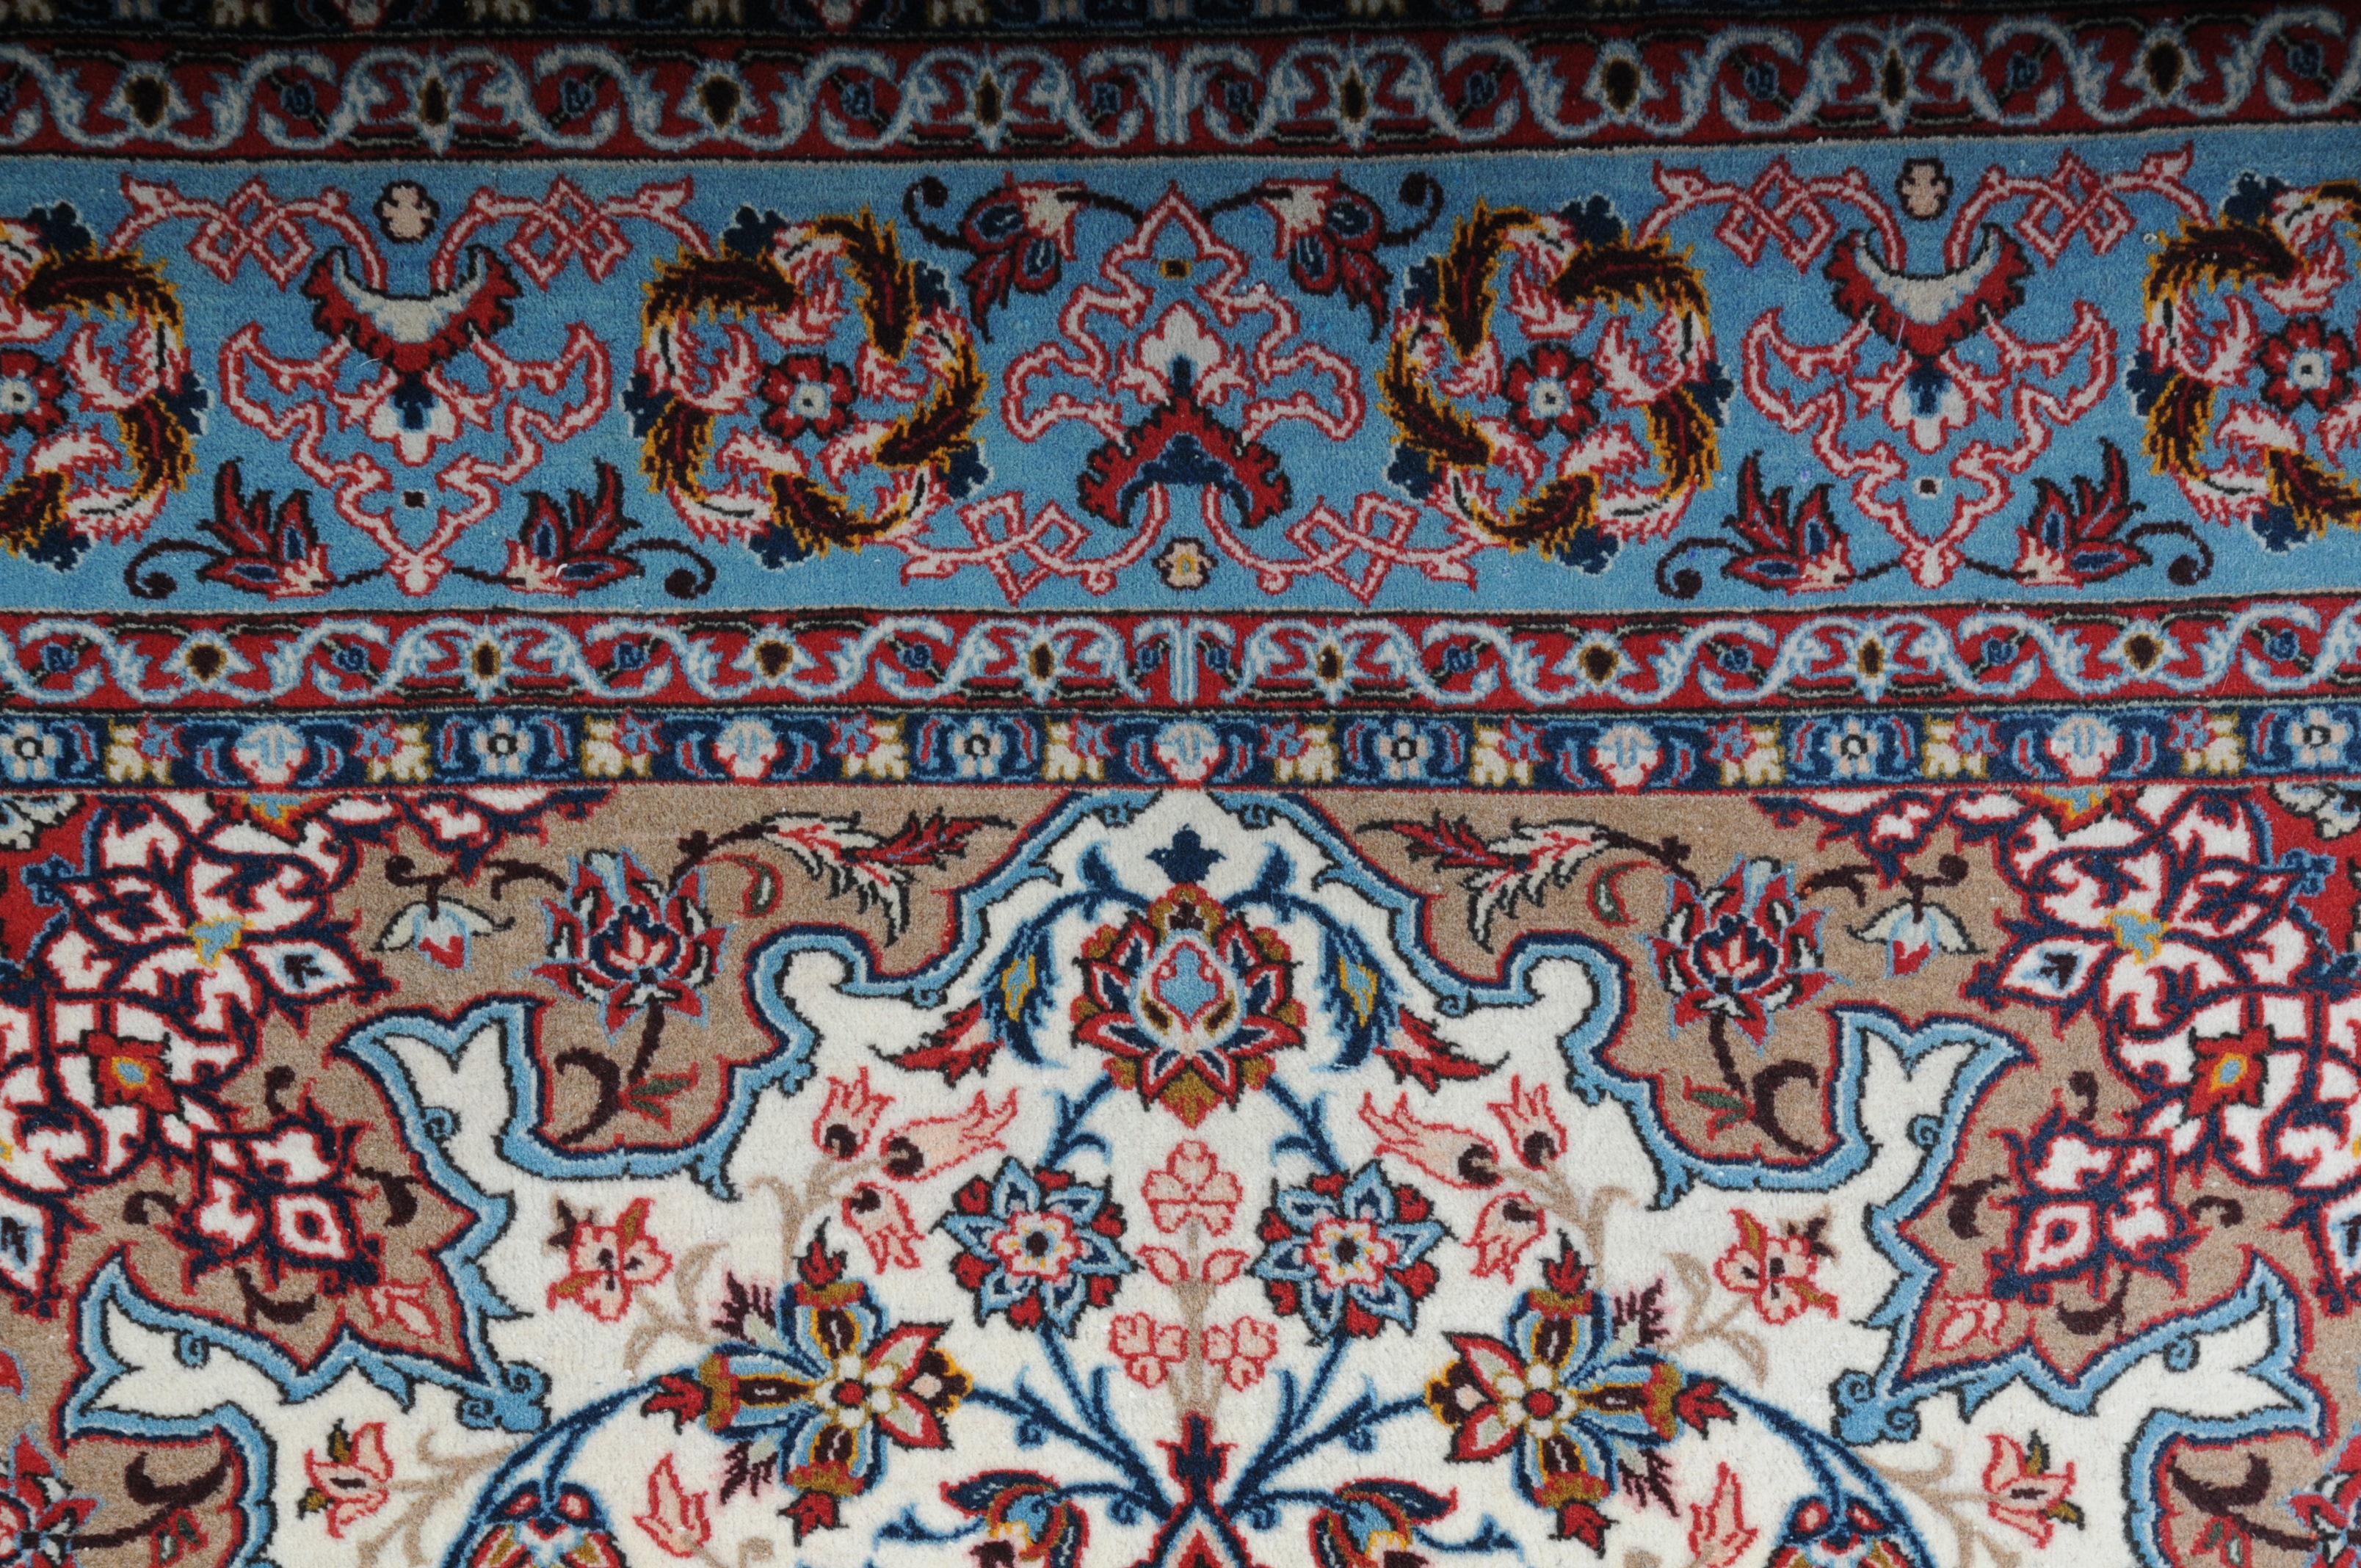 Original Isfahan carpet 20th century

Beautiful Isfahan carpet with mandalas.
Splendid colors characterize this symmetrically displayed and finely knotted carpet.
Brightly colored mirror with field-filling matching oval medallion and